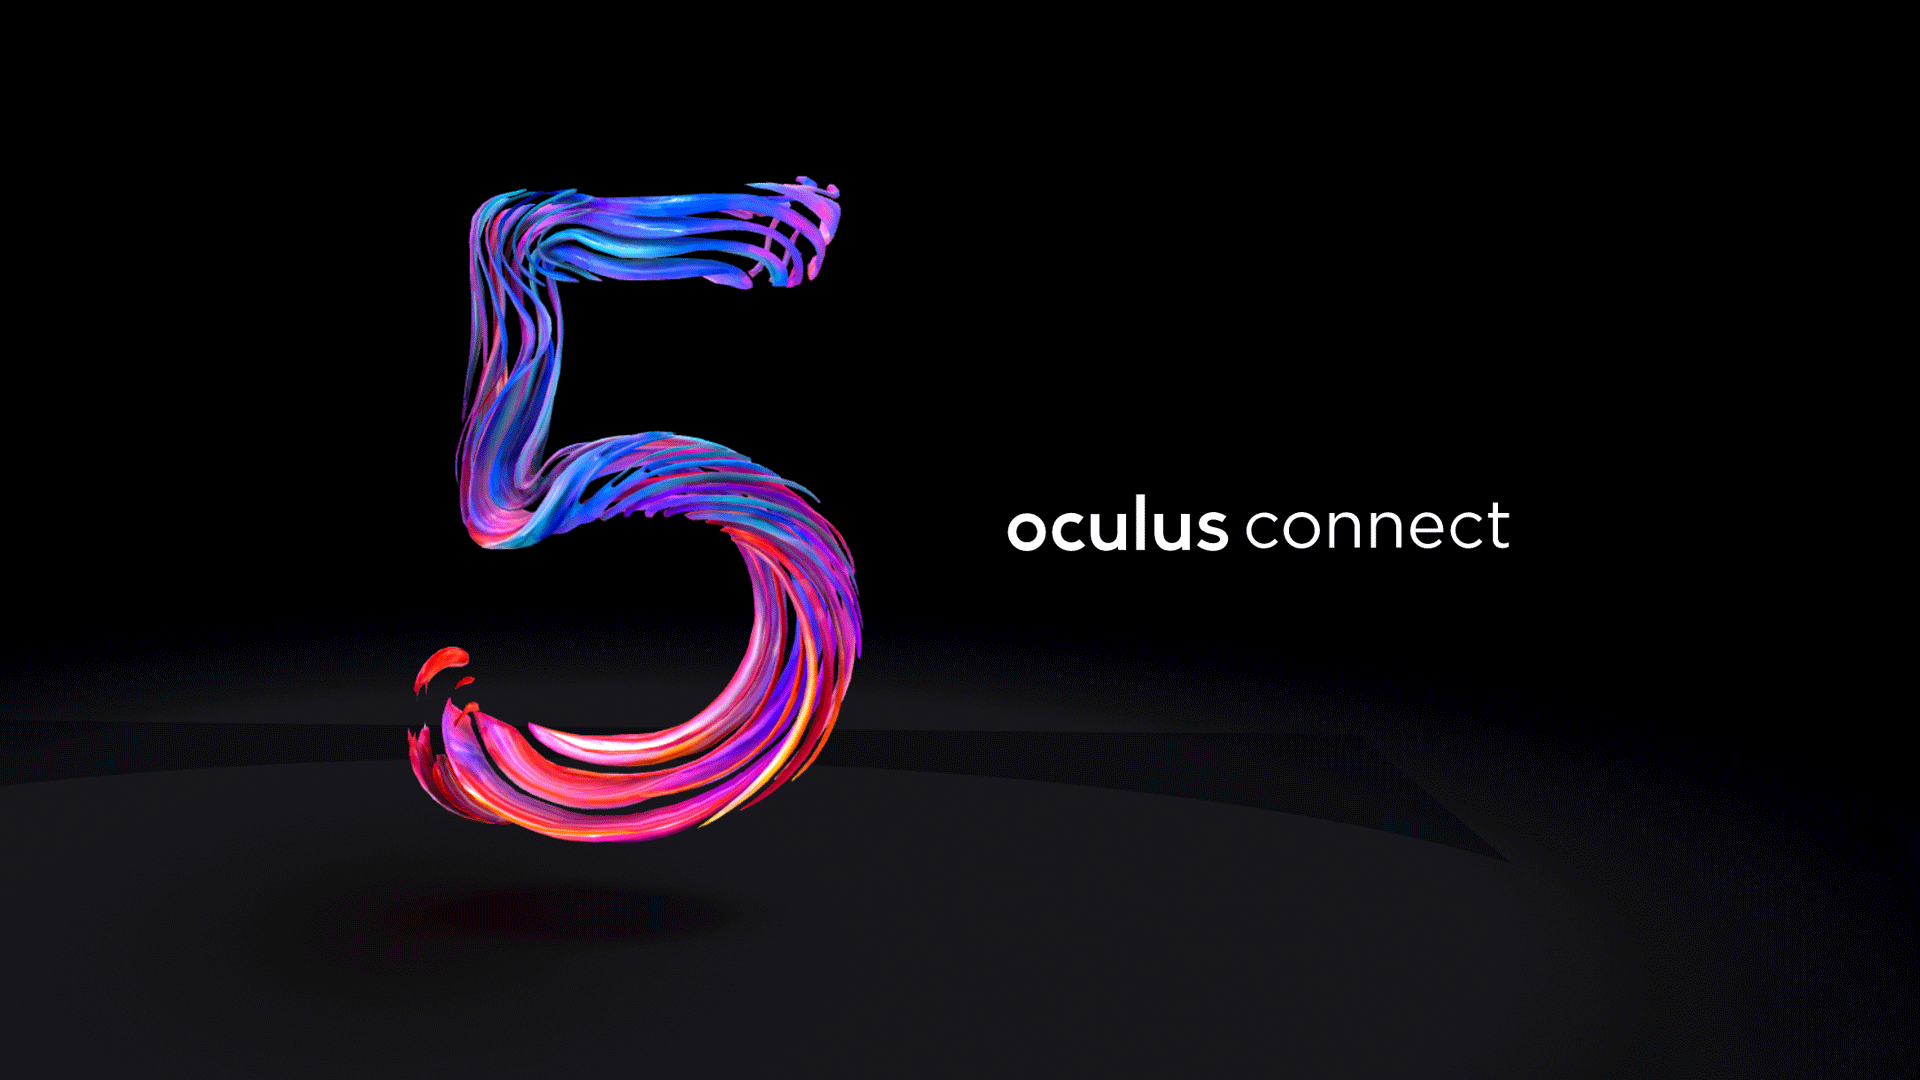 oculus-connect-logo-png8.png